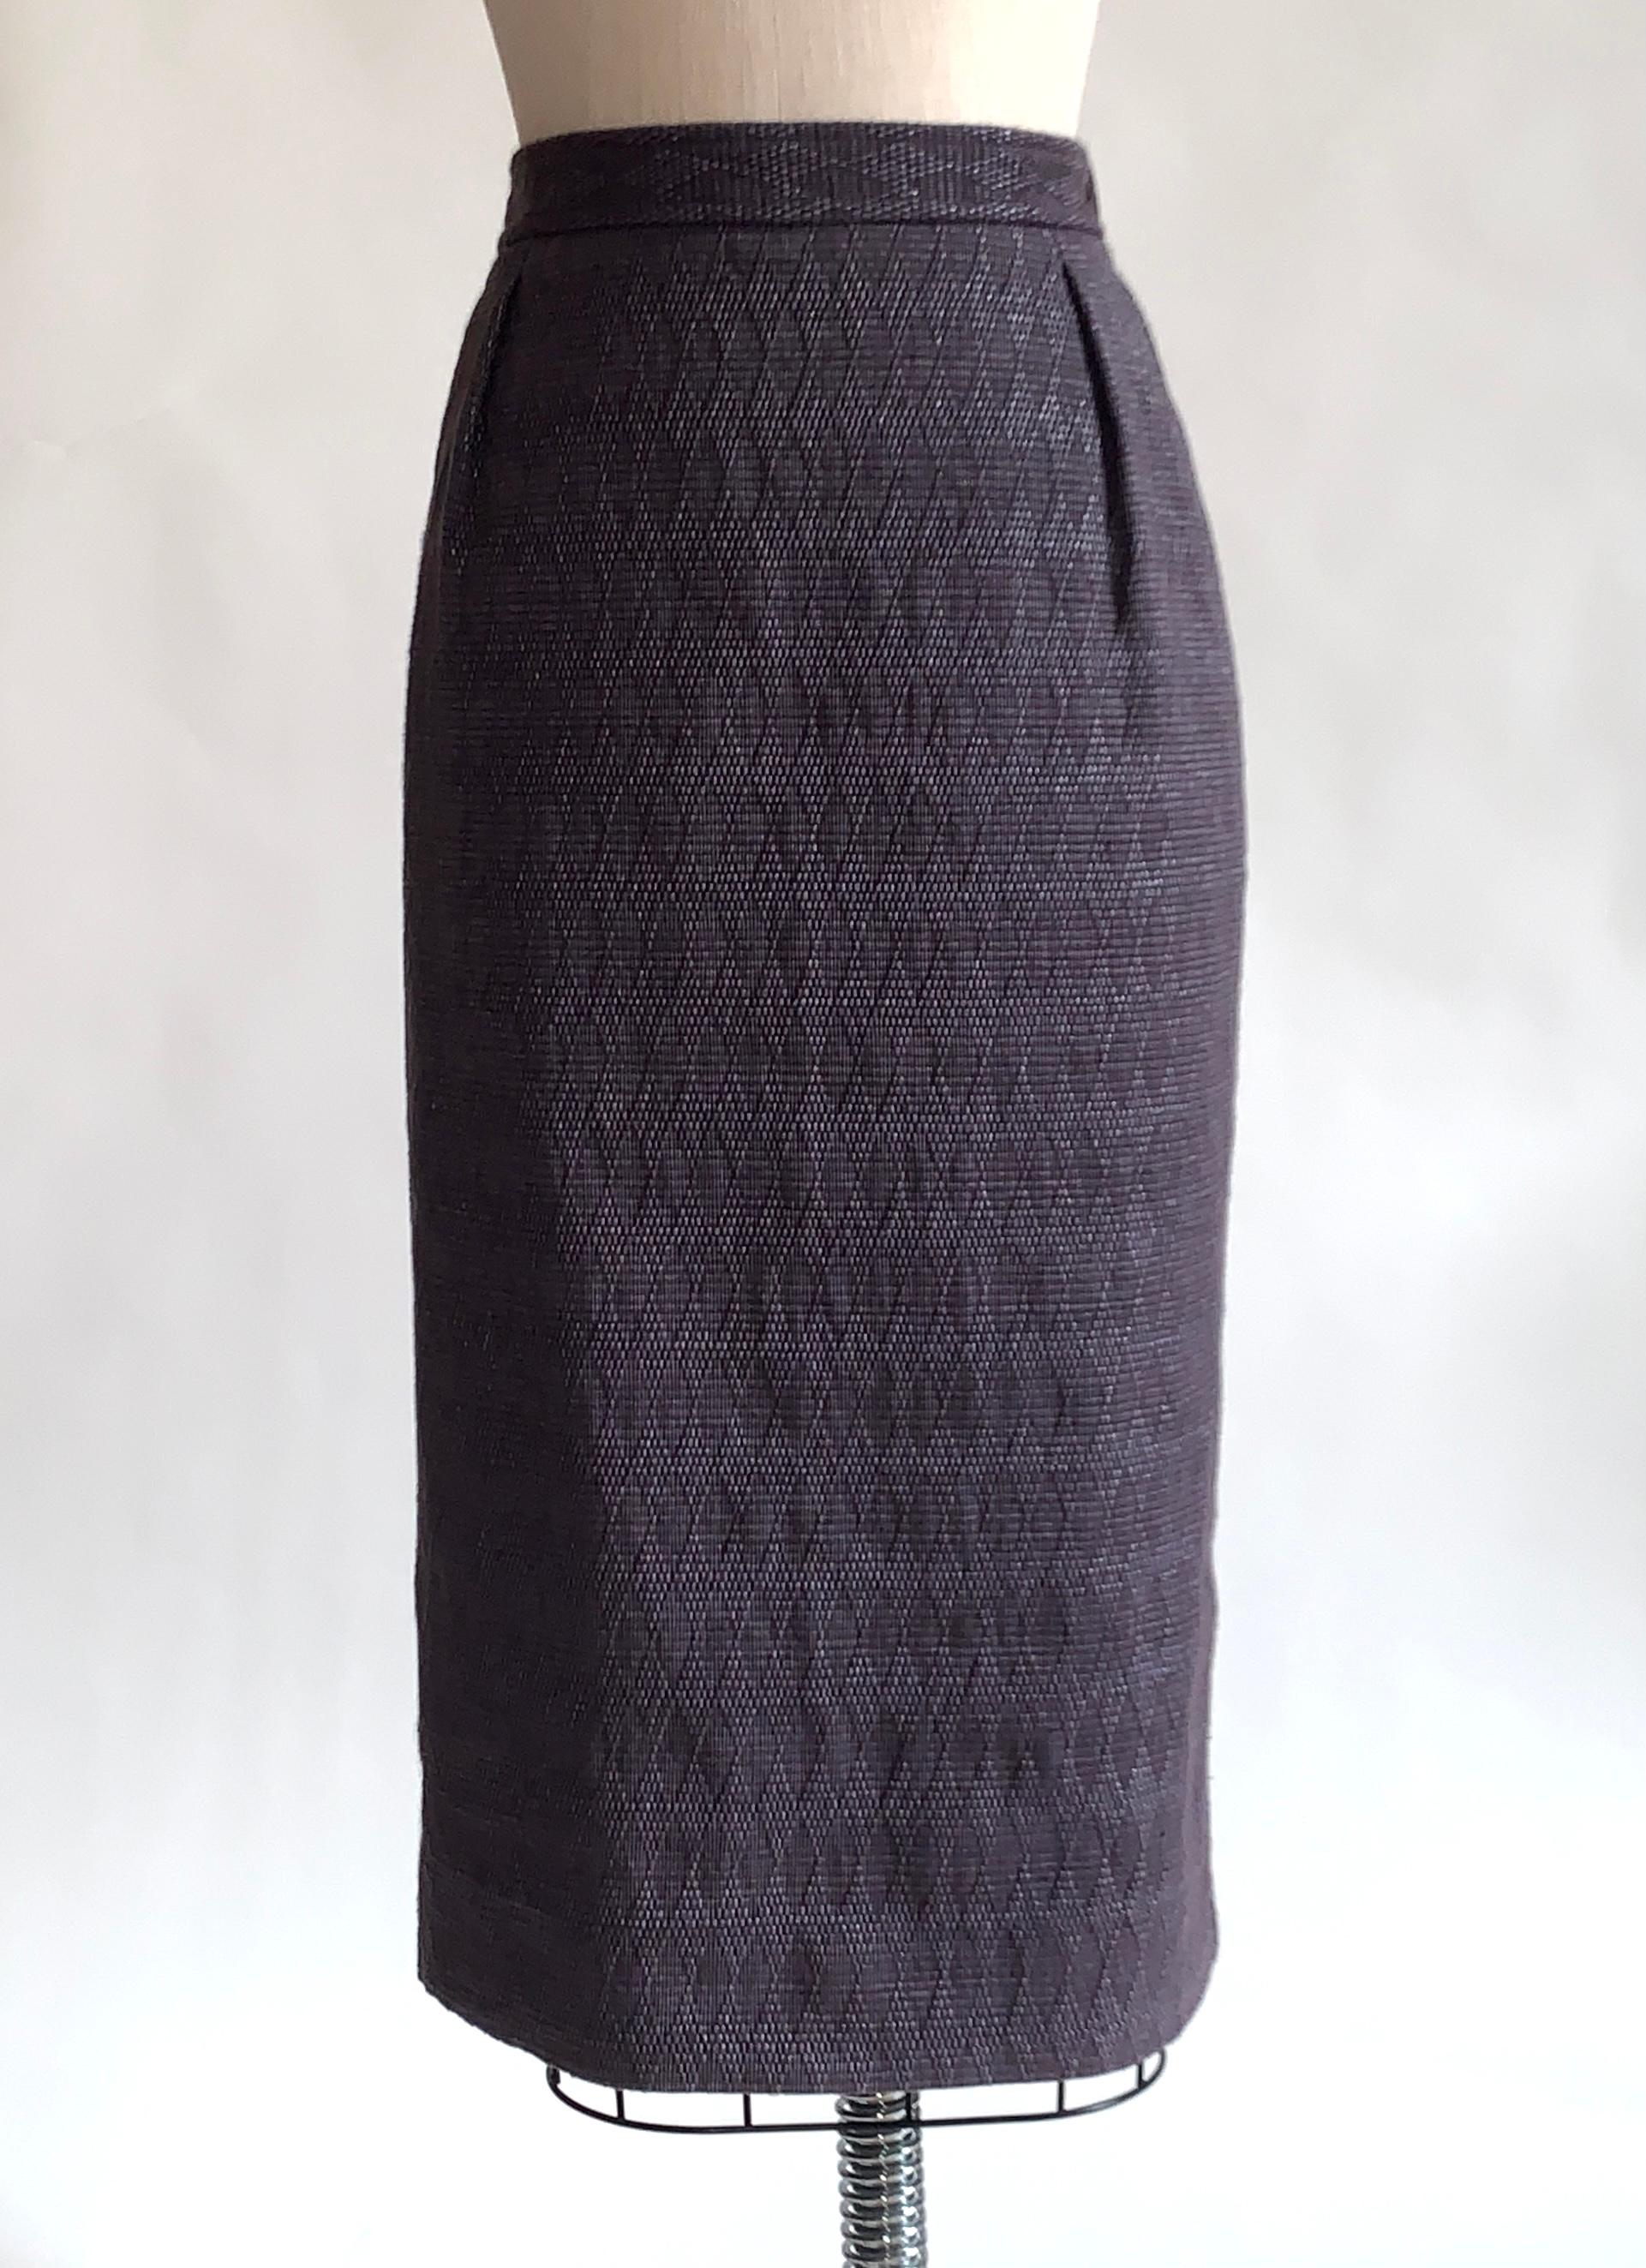 Yves Saint Laurent 2005 Rive Gauche purple pencil skirt in a diamond weave composed of an amazing flax blend that almost feels like a soft woven rubber. Side pockets. Side zip and button closure. 

52% cotton, 27% nylon, 21% flax. 
Fully